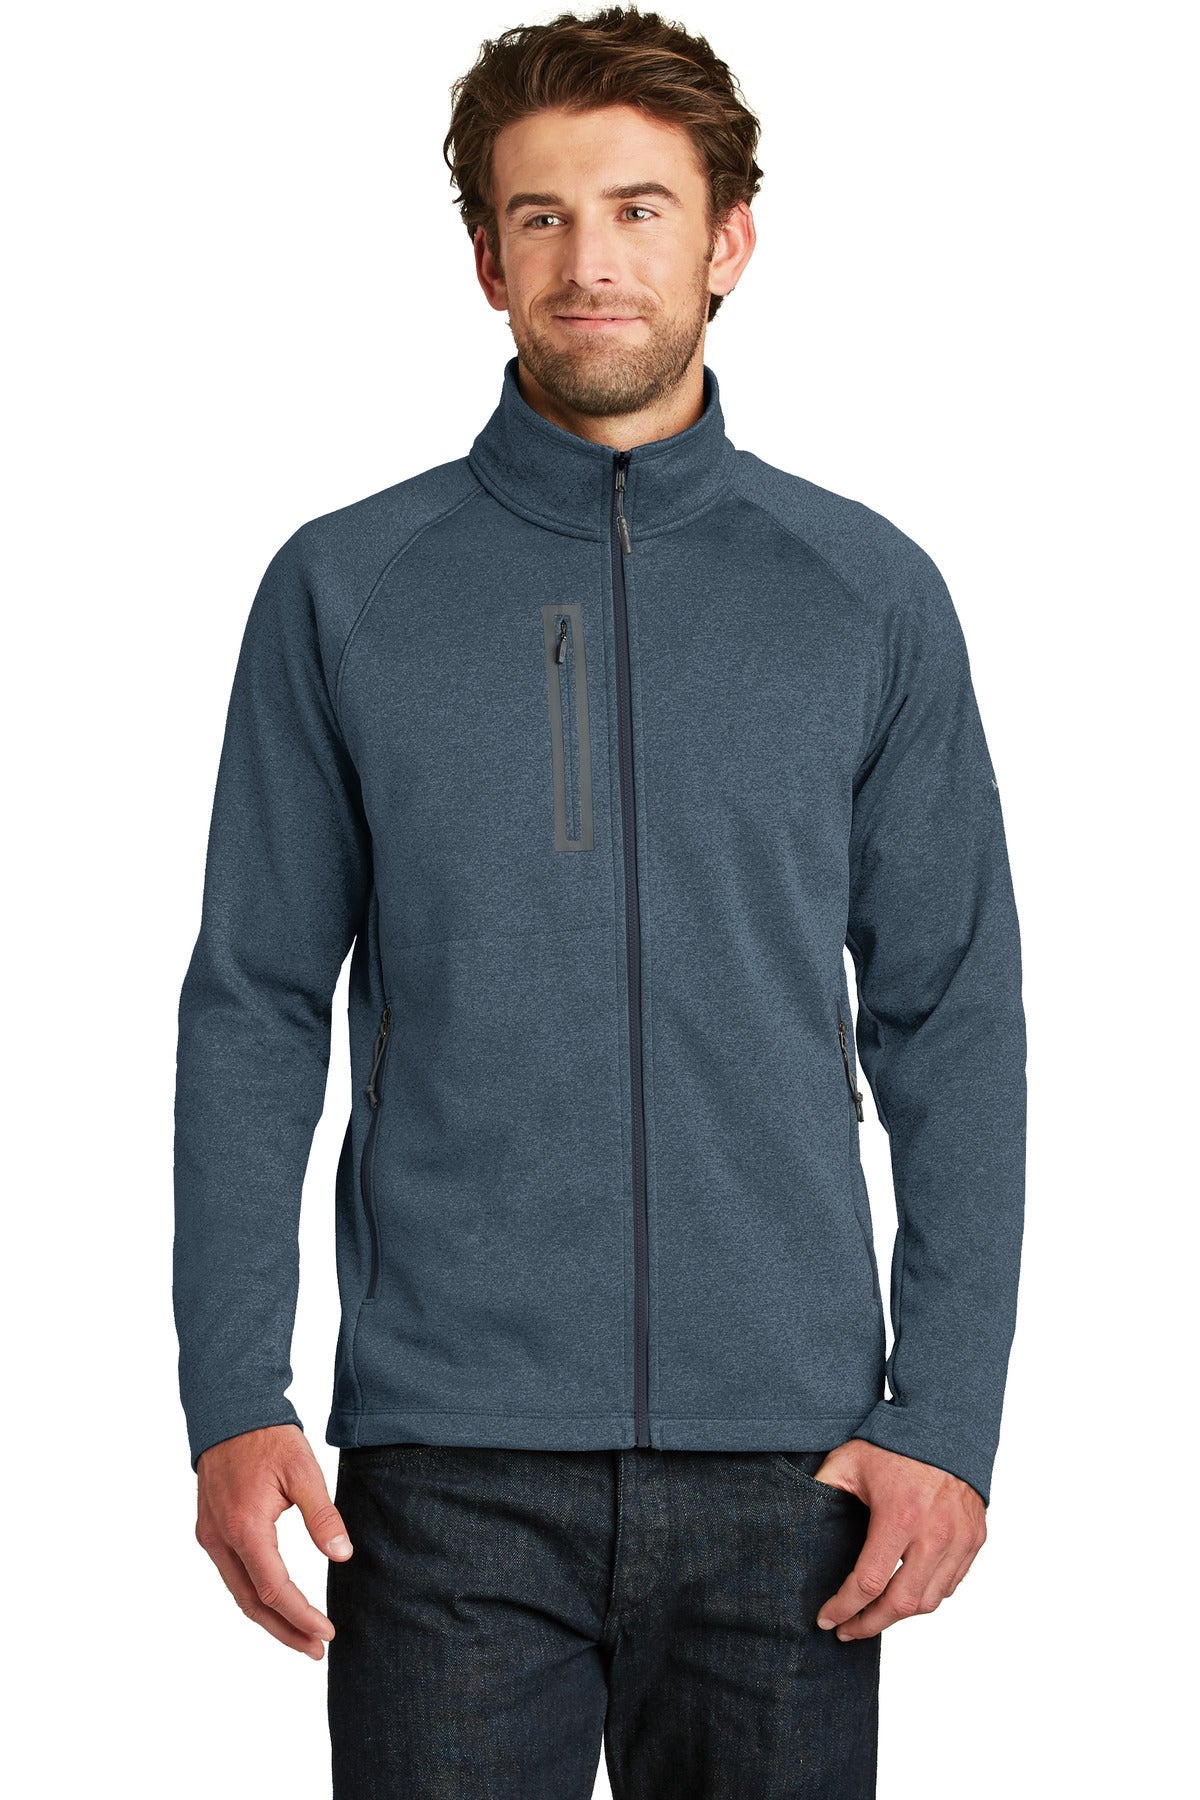 The North Face ® Canyon Flats Fleece Jacket. NF0A3LH9 - DFW Impression